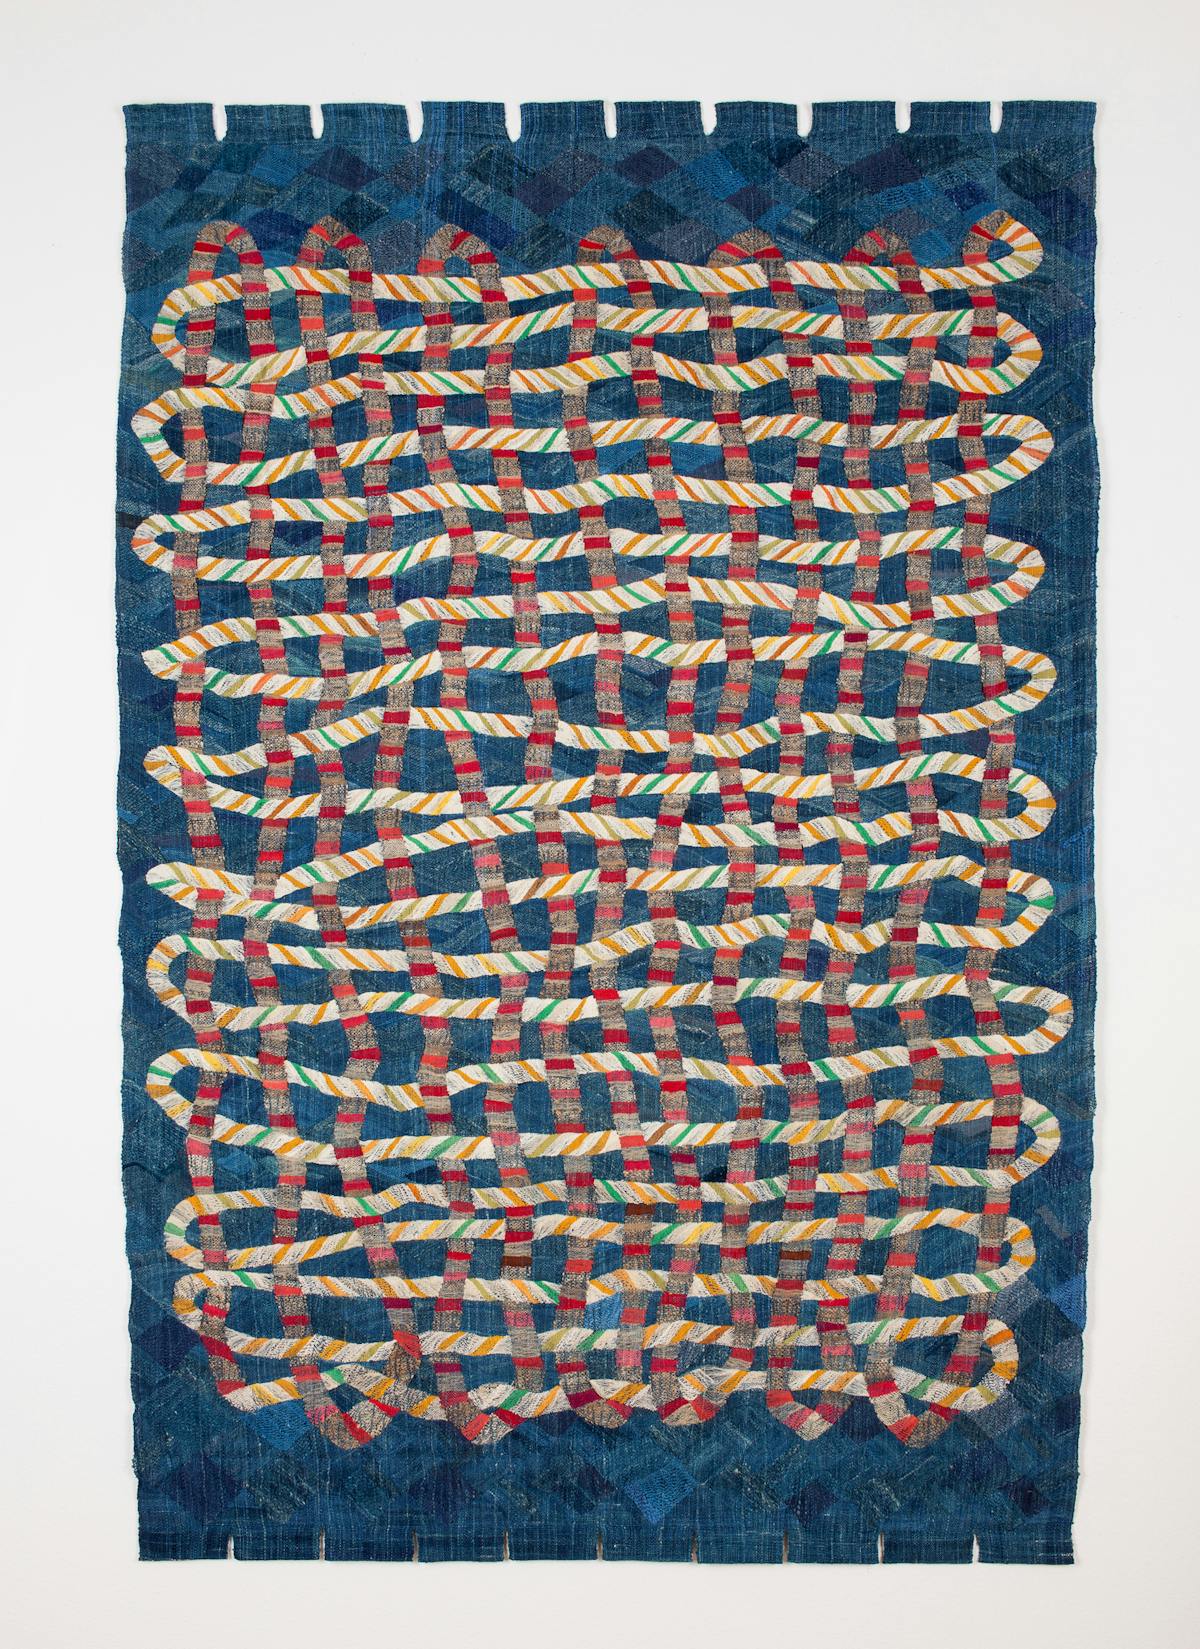 blue tapestry with image of a rope weaving in red and cream colors